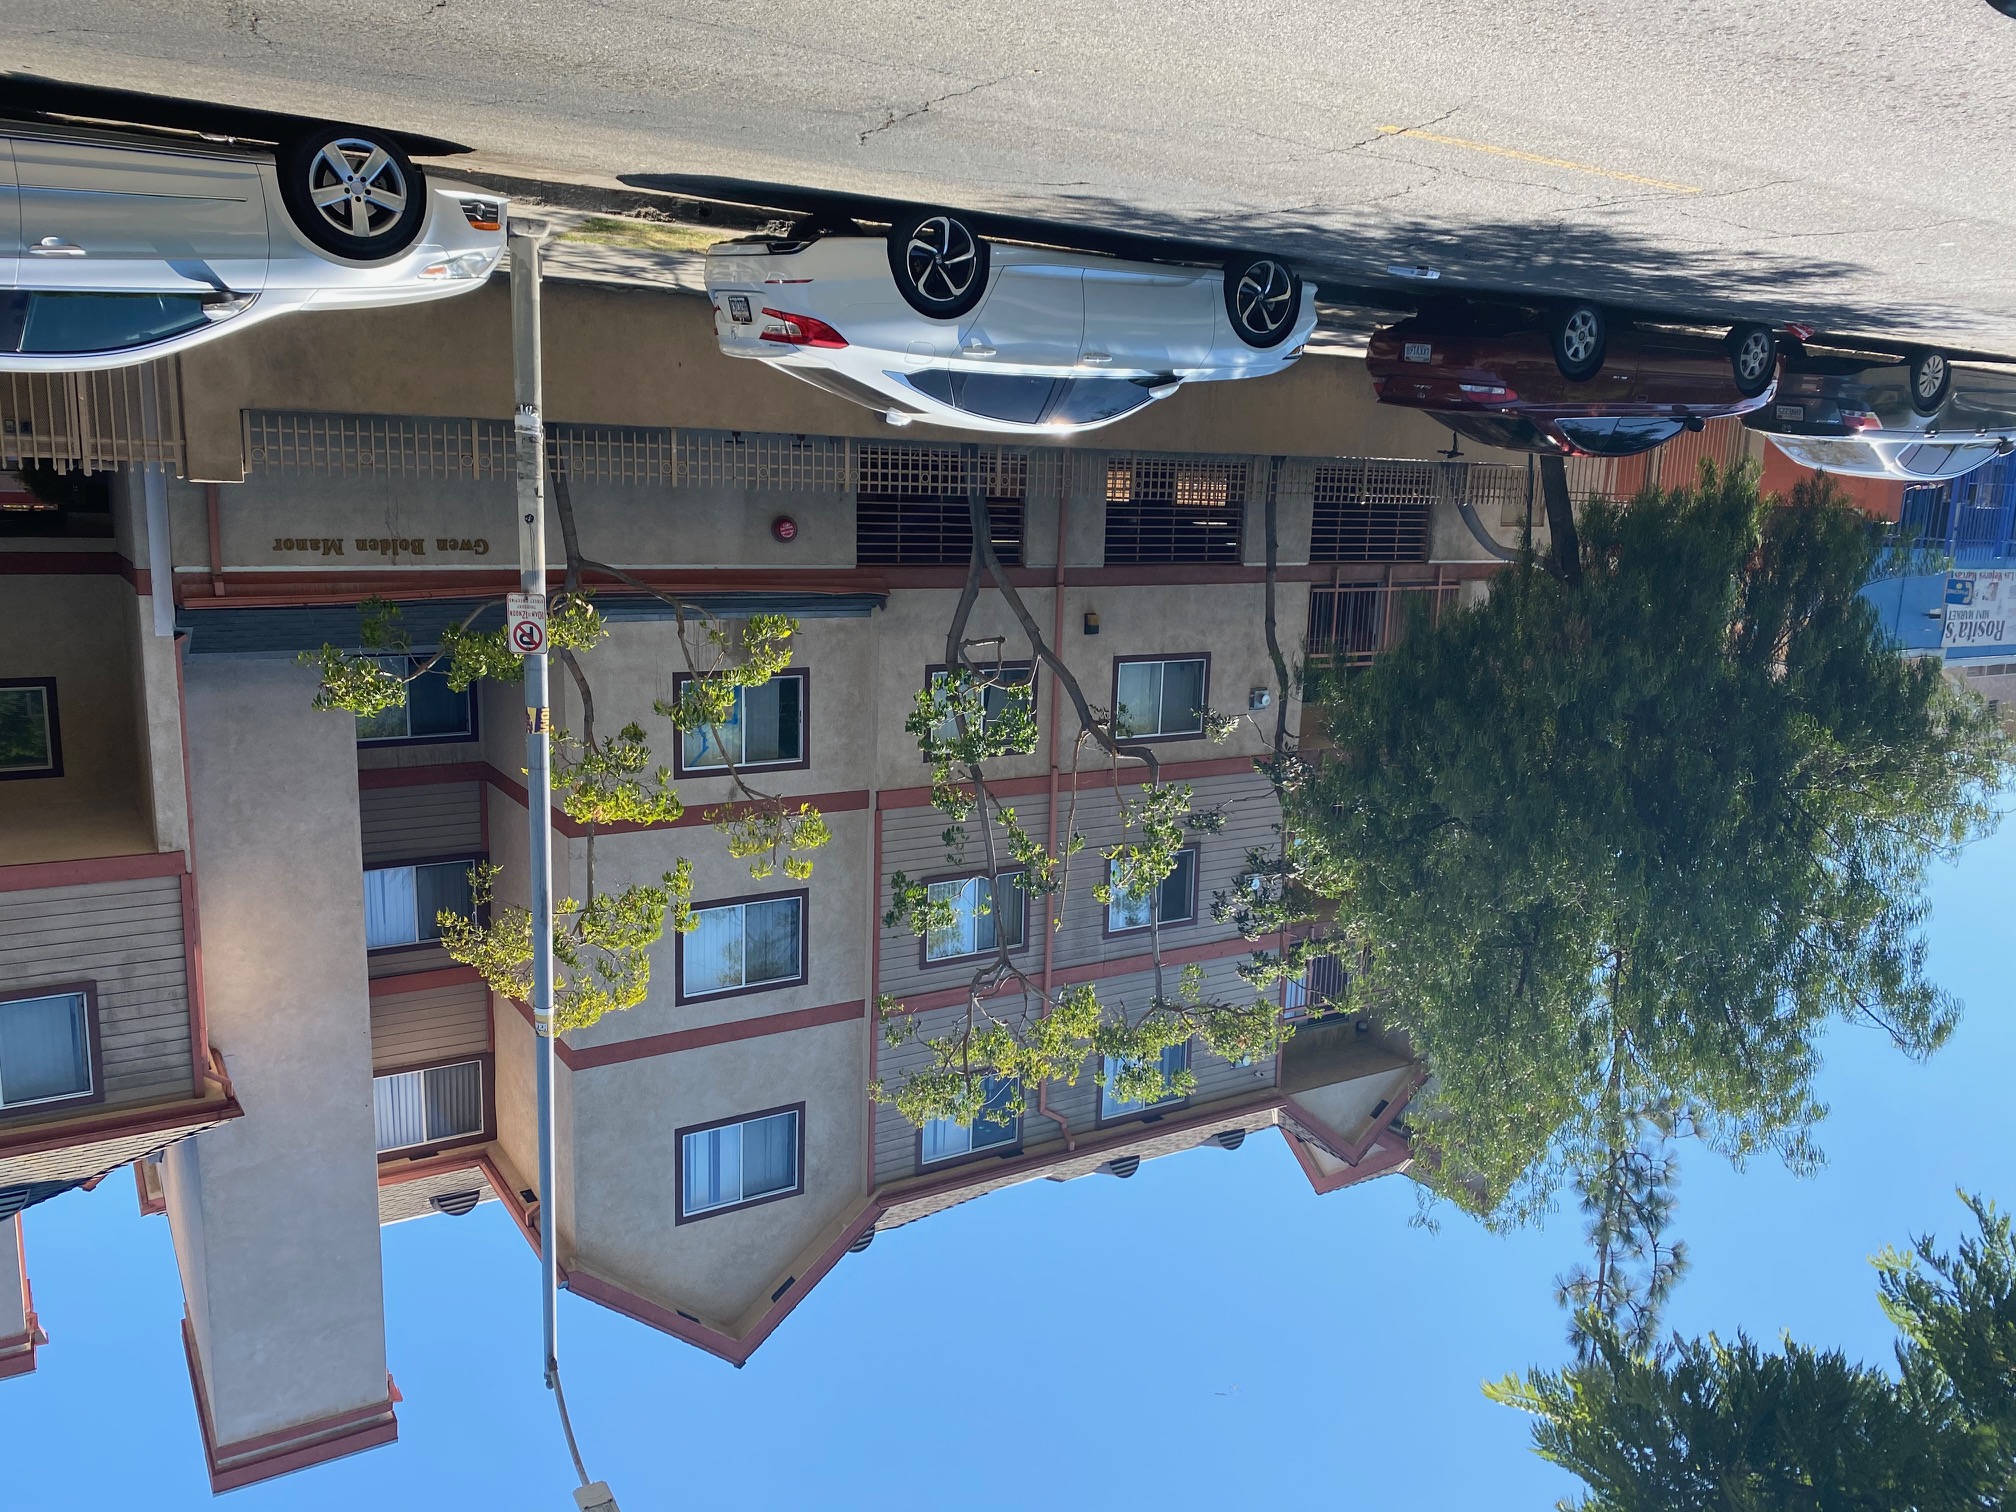 Street view of a three story brown apartment building